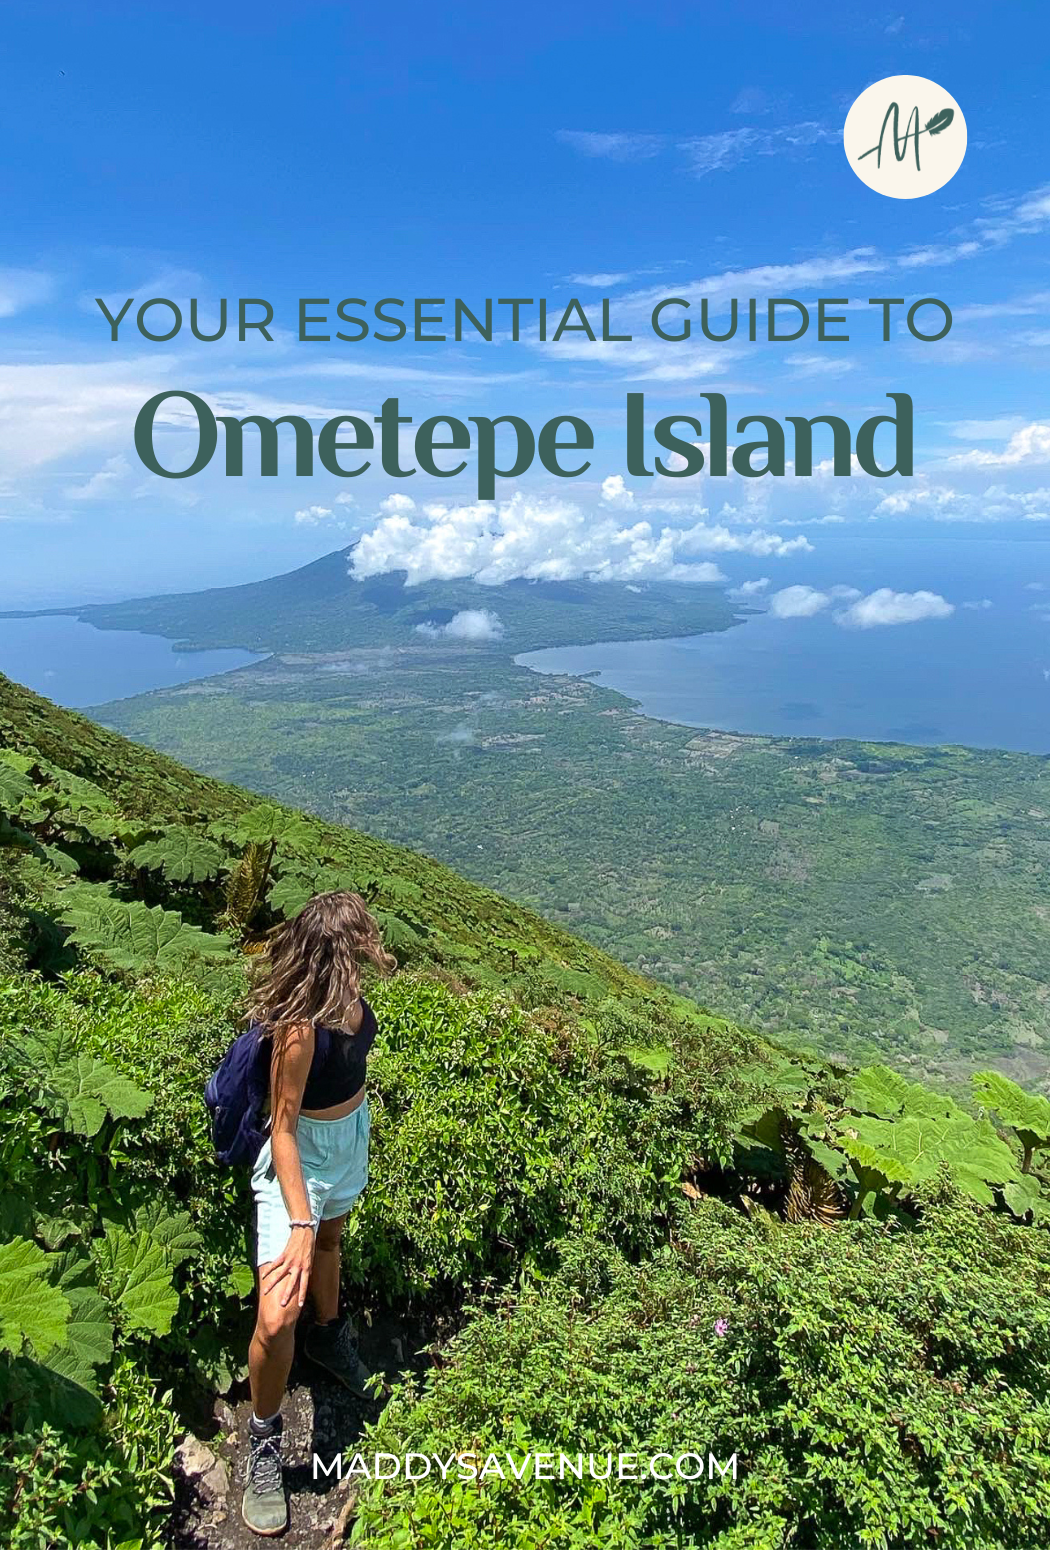 Planning a trip to Ometepe Island, Nicaragua? I was lucky enough to live on this magical island for an entire month, experiencing all of the best things to do on Ometepe Island. And now, this Isla de Ometepe travel guide is here to show you the way! Ready to hike the active Volcano Concepción for breathtaking views? Kayak between two volcanoes on Lake Nicaragua (Lago Cocibolca)? That's just the tip of the iceberg (or volcano, in this case!) of incredible things to do on Ometepe, Nicaragua.